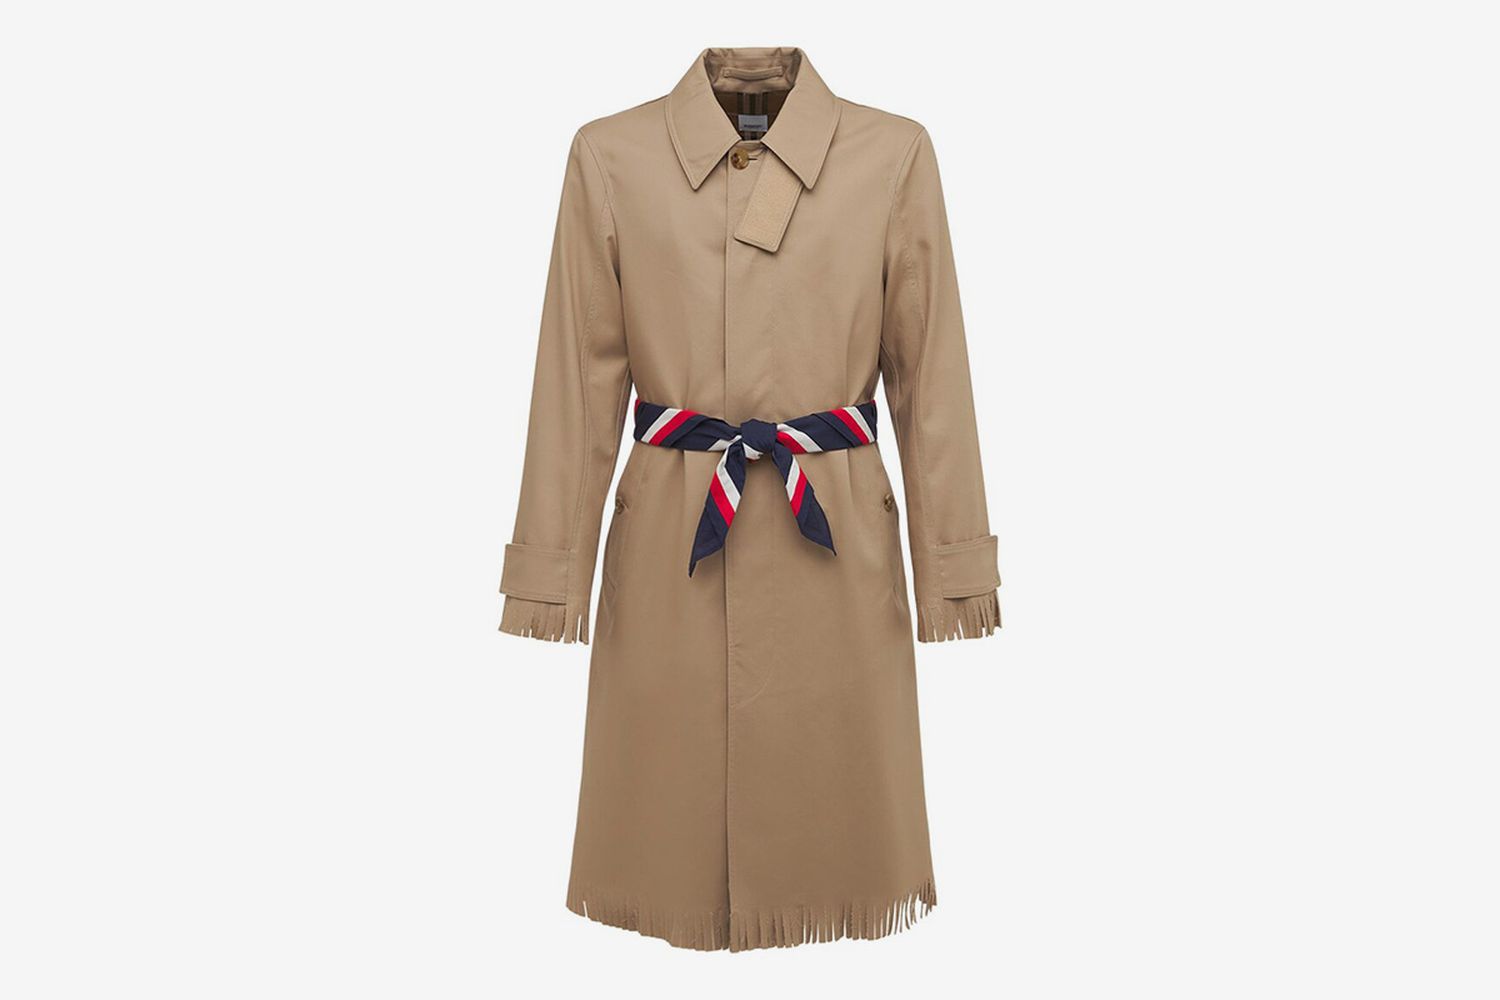 Trench Coats: 10 of the Best to Wear in Fall 2021